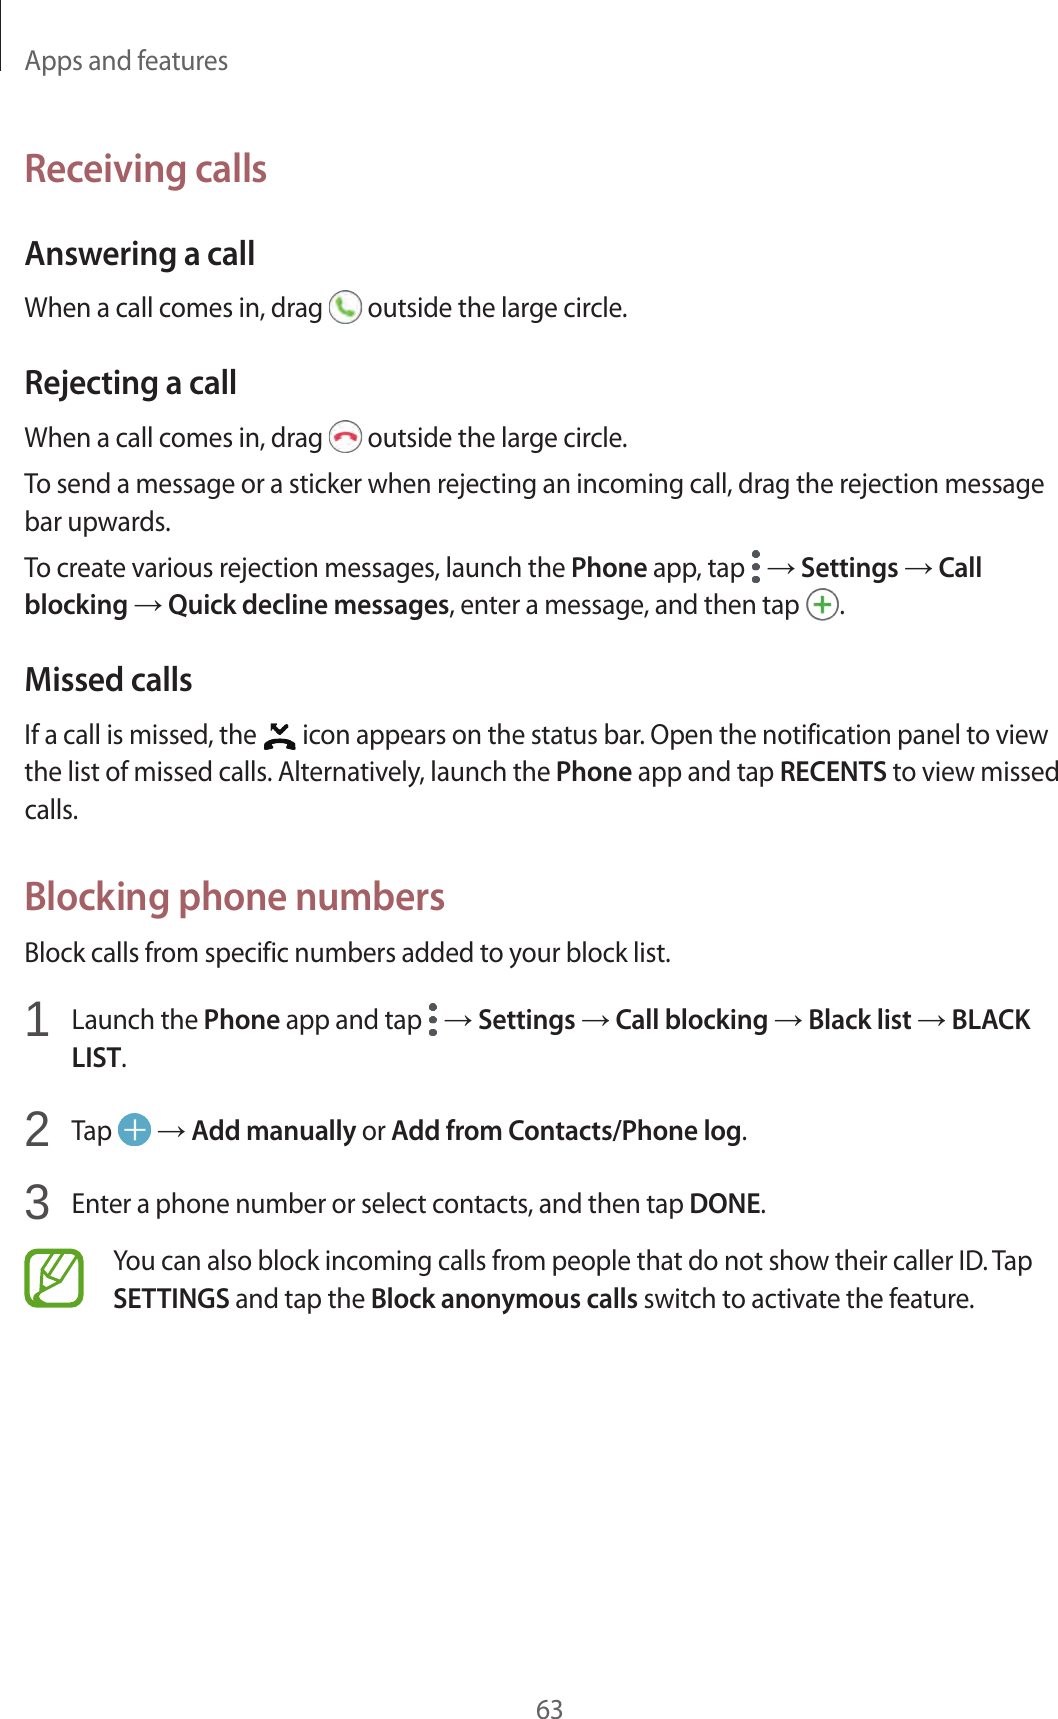 Apps and features63Receiving callsAnswering a callWhen a call comes in, drag   outside the large circle.Rejecting a callWhen a call comes in, drag   outside the large circle.To send a message or a sticker when rejecting an incoming call, drag the rejection message bar upwards.To create various rejection messages, launch the Phone app, tap   → Settings → Call blocking → Quick decline messages, enter a message, and then tap  .Missed callsIf a call is missed, the   icon appears on the status bar. Open the notification panel to view the list of missed calls. Alternatively, launch the Phone app and tap RECENTS to view missed calls.Blocking phone numbersBlock calls from specific numbers added to your block list.1  Launch the Phone app and tap   → Settings → Call blocking → Black list → BLACK LIST.2  Tap   → Add manually or Add from Contacts/Phone log.3  Enter a phone number or select contacts, and then tap DONE.You can also block incoming calls from people that do not show their caller ID. Tap SETTINGS and tap the Block anonymous calls switch to activate the feature.